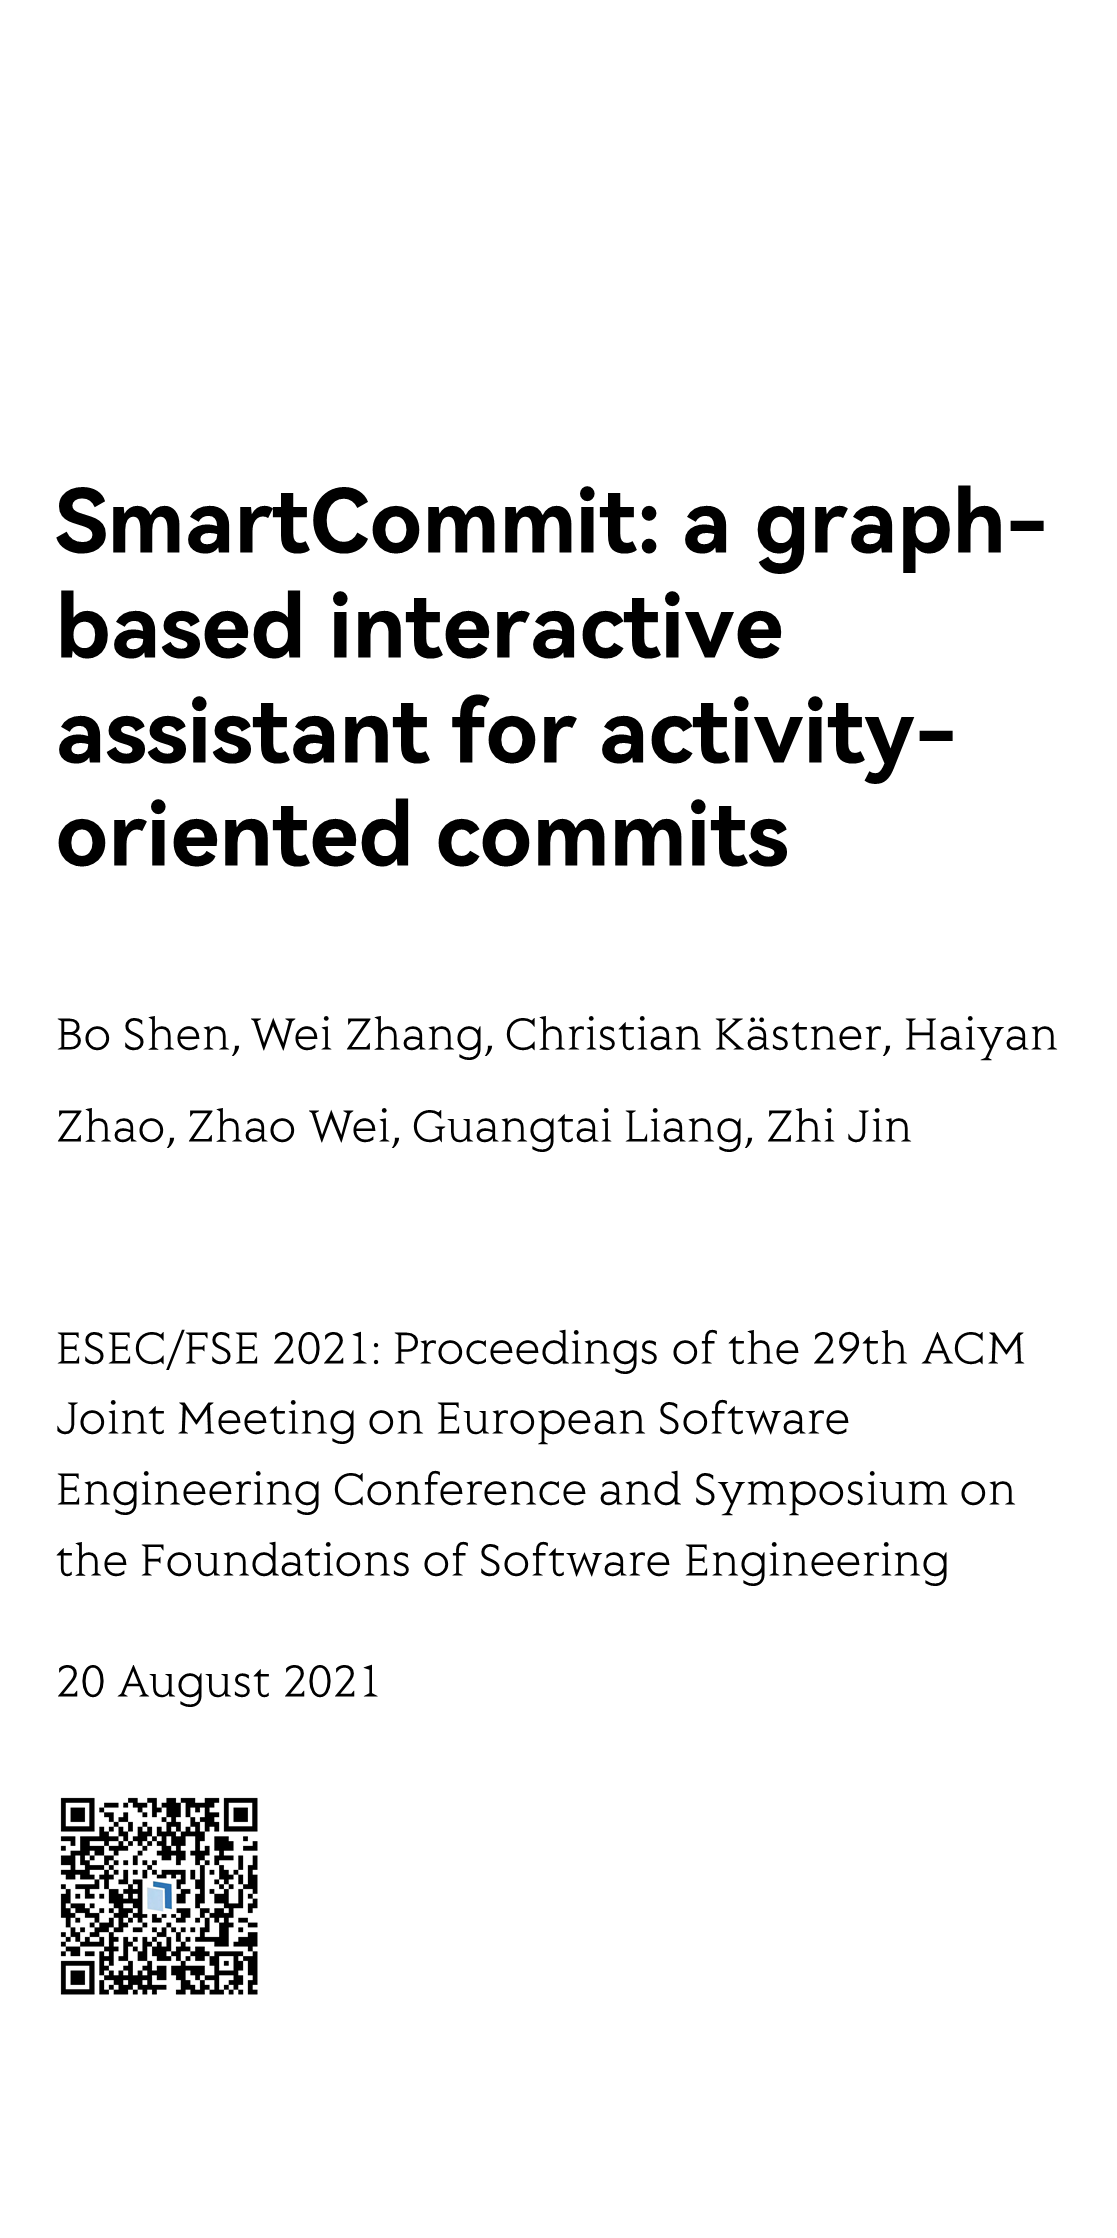 ESEC/FSE 2021: Proceedings of the 29th ACM Joint Meeting on European Software Engineering Conference and Symposium on the Foundations of Software Engineering_1